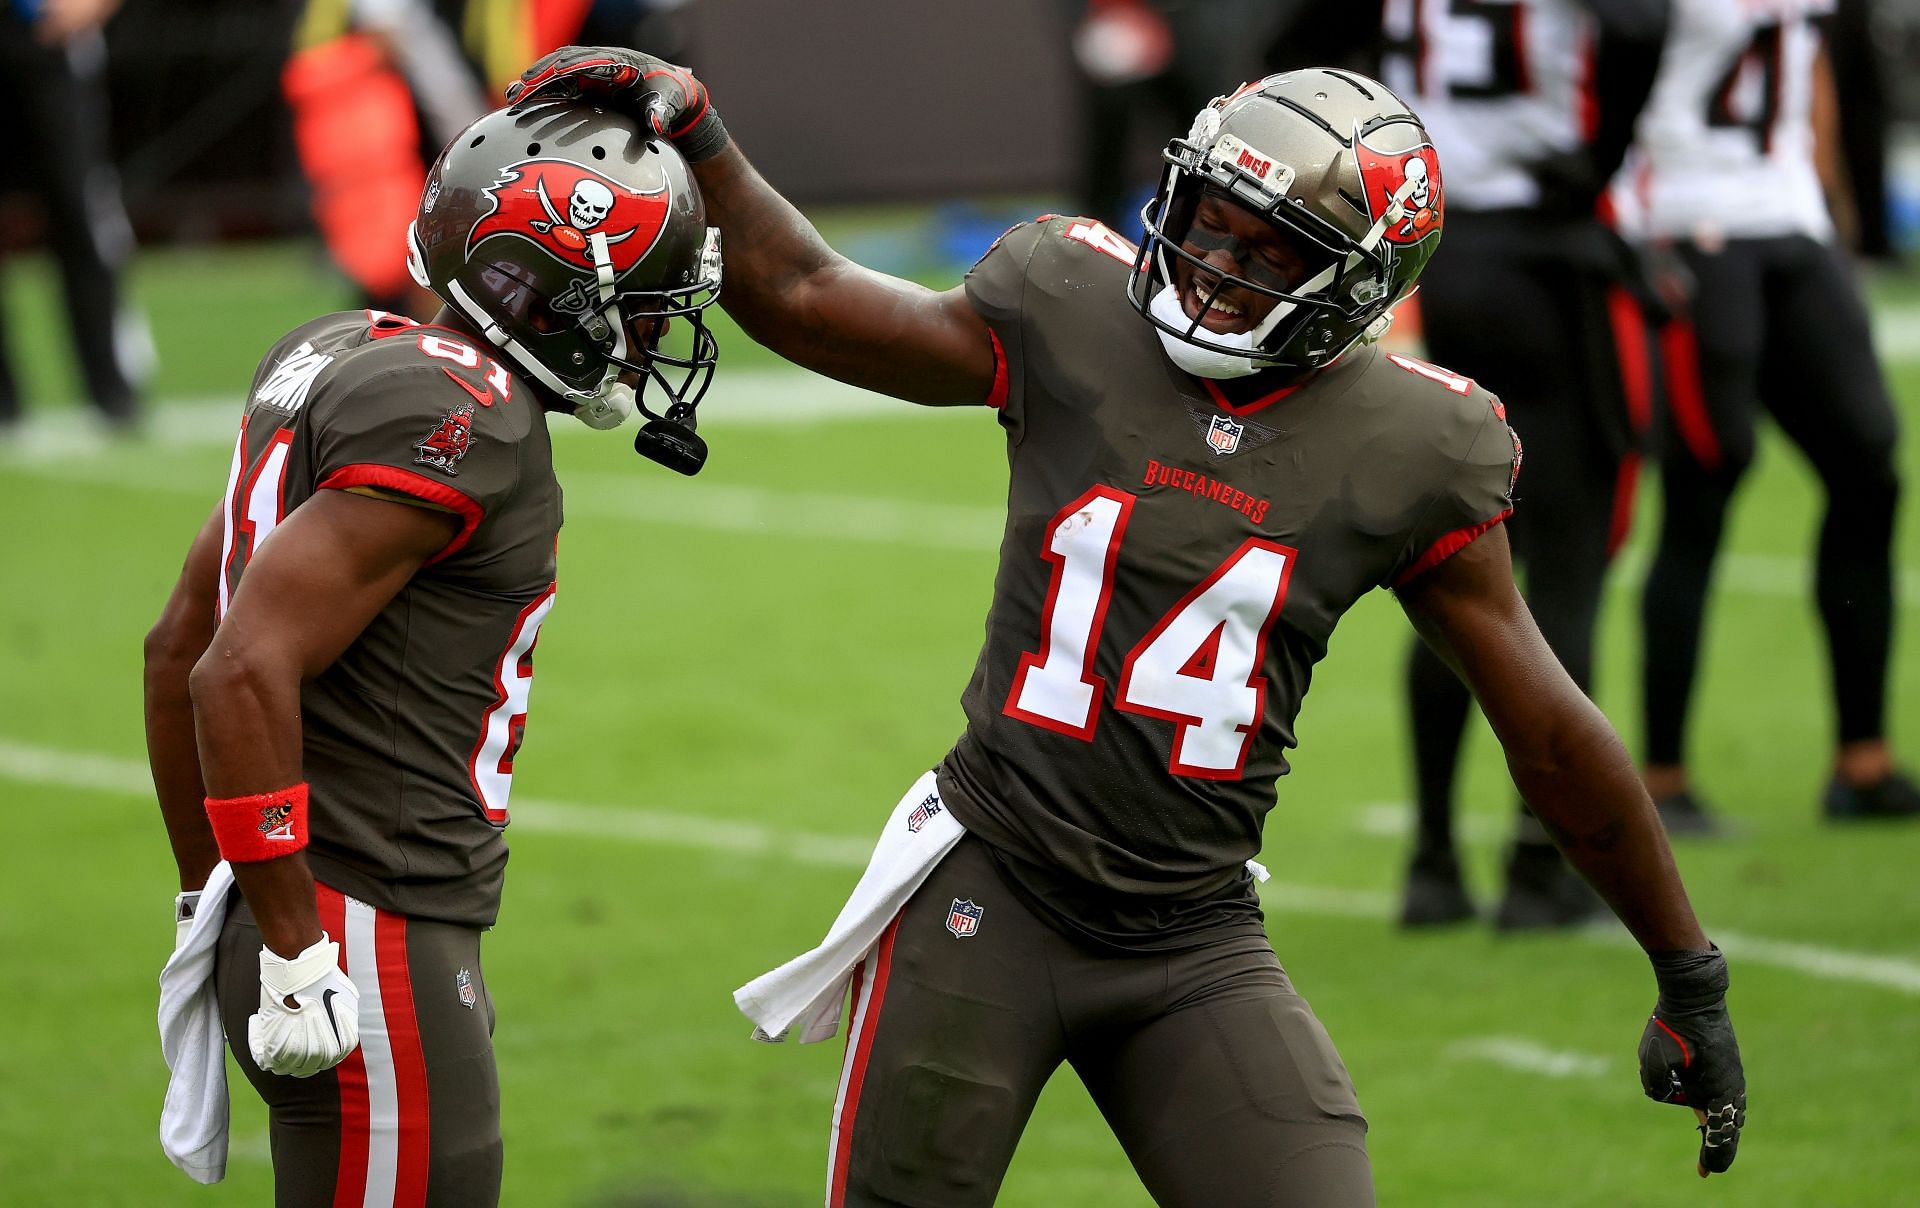 Where do Antonio Brown (L), Chris Godwin, and the Tampa Bay Buccaneers receiving corps rank?